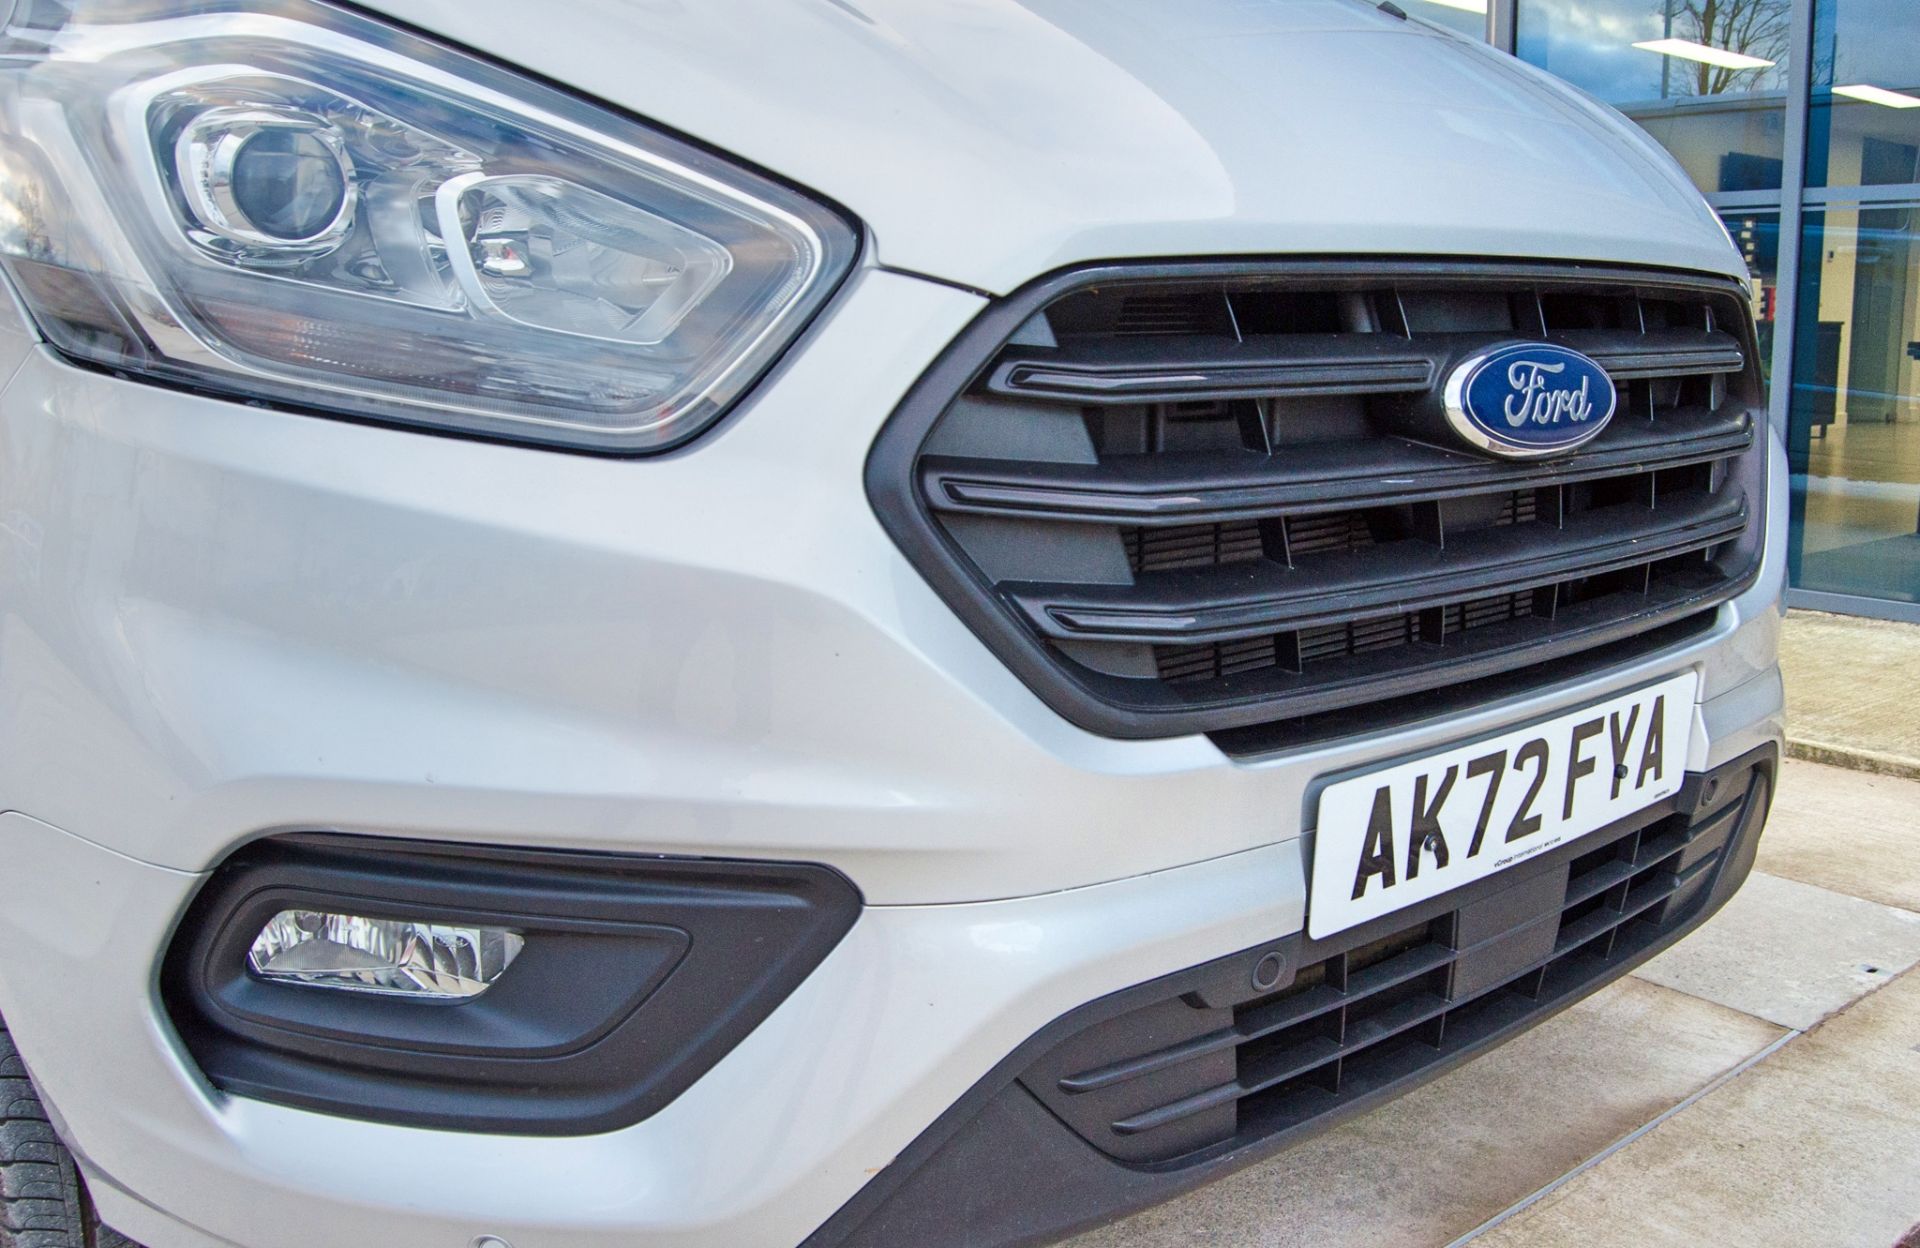 Ford Transit Custom 340 Trend L1 H1 Euro 6 plug in hybrid automatic window cleaning converted - Image 14 of 34